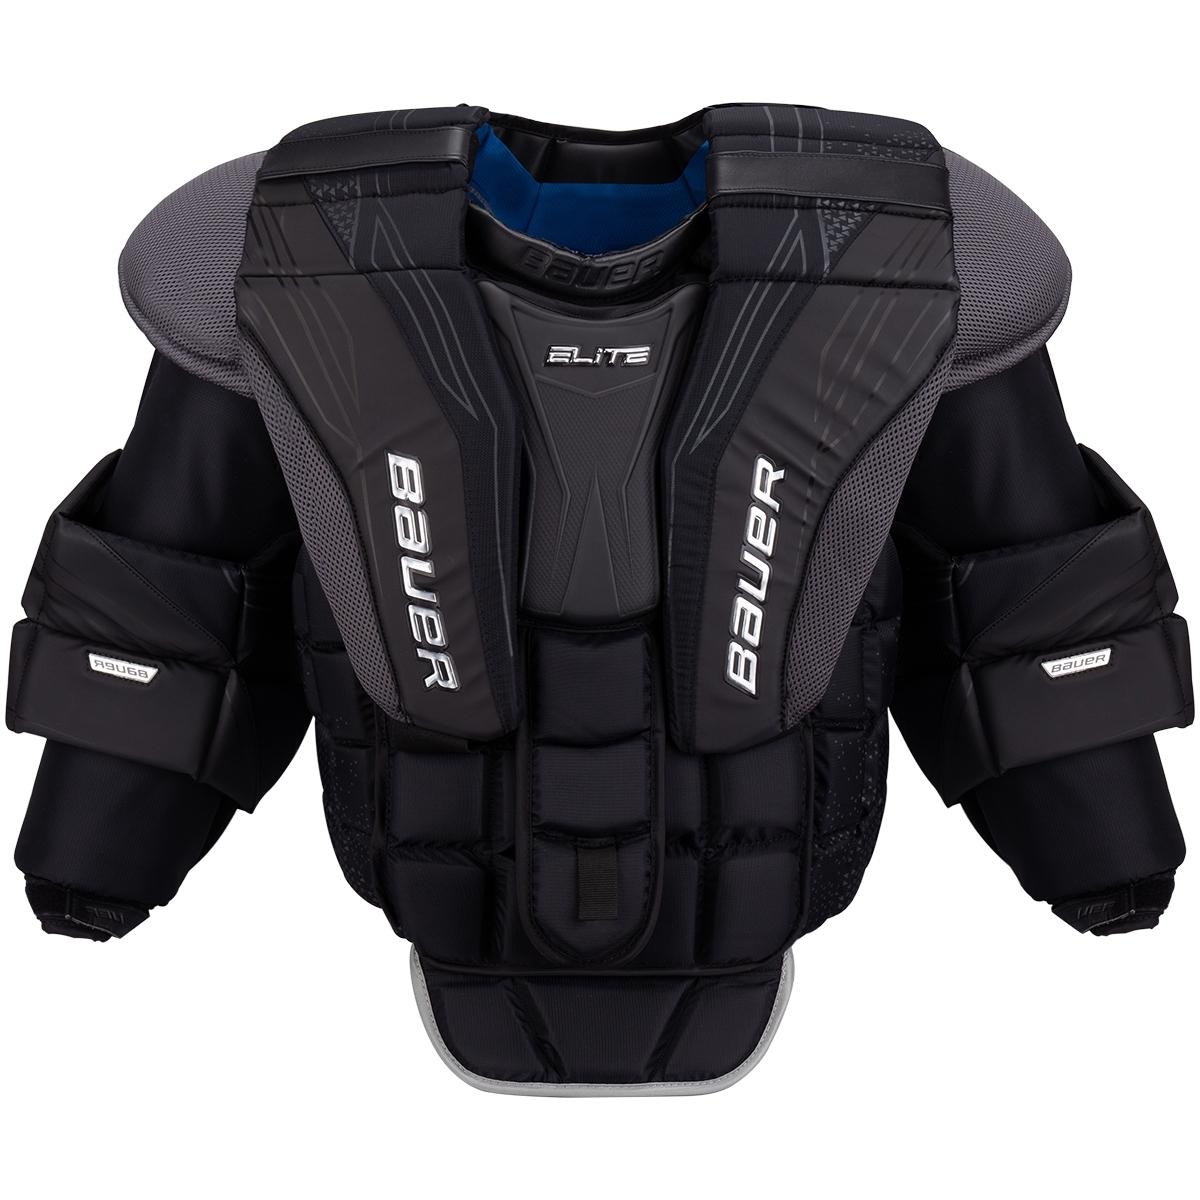 Bauer Elite Int. Goalie Chest & Arm Protectorproduct zoom image #1